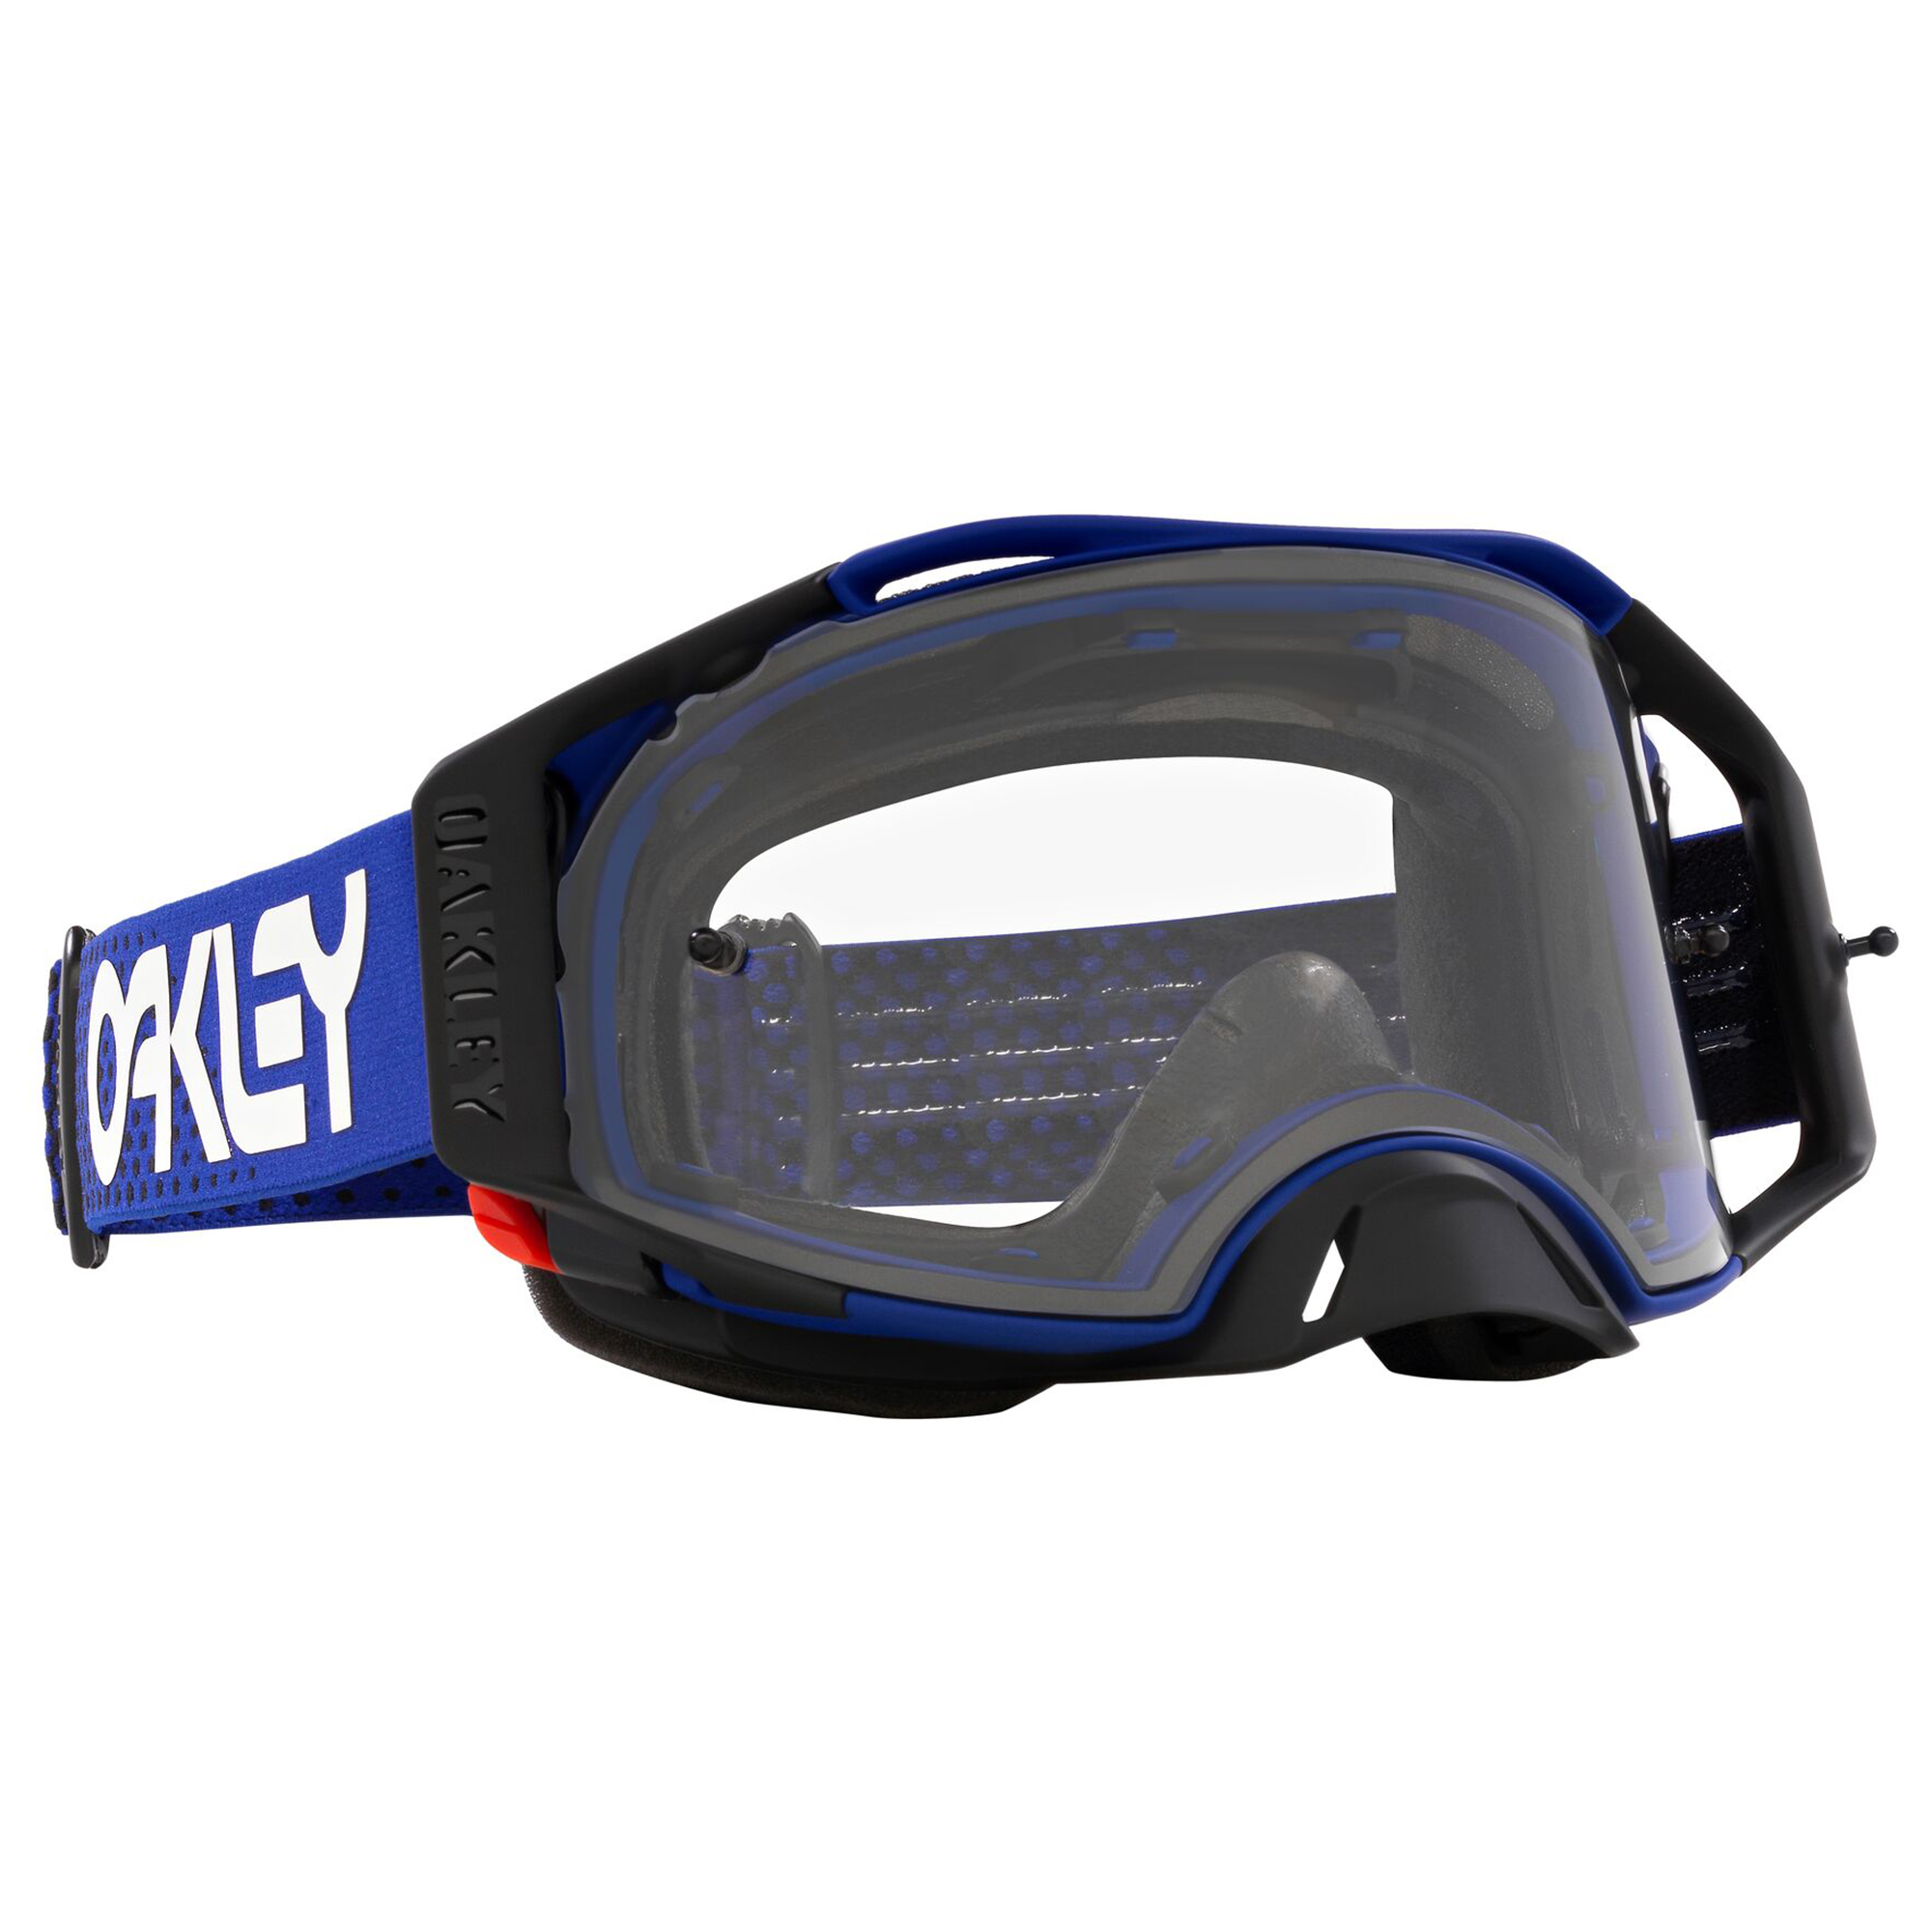 Oakley Airbrake MX Goggle in Moto Blue with Clear Lens on White Background